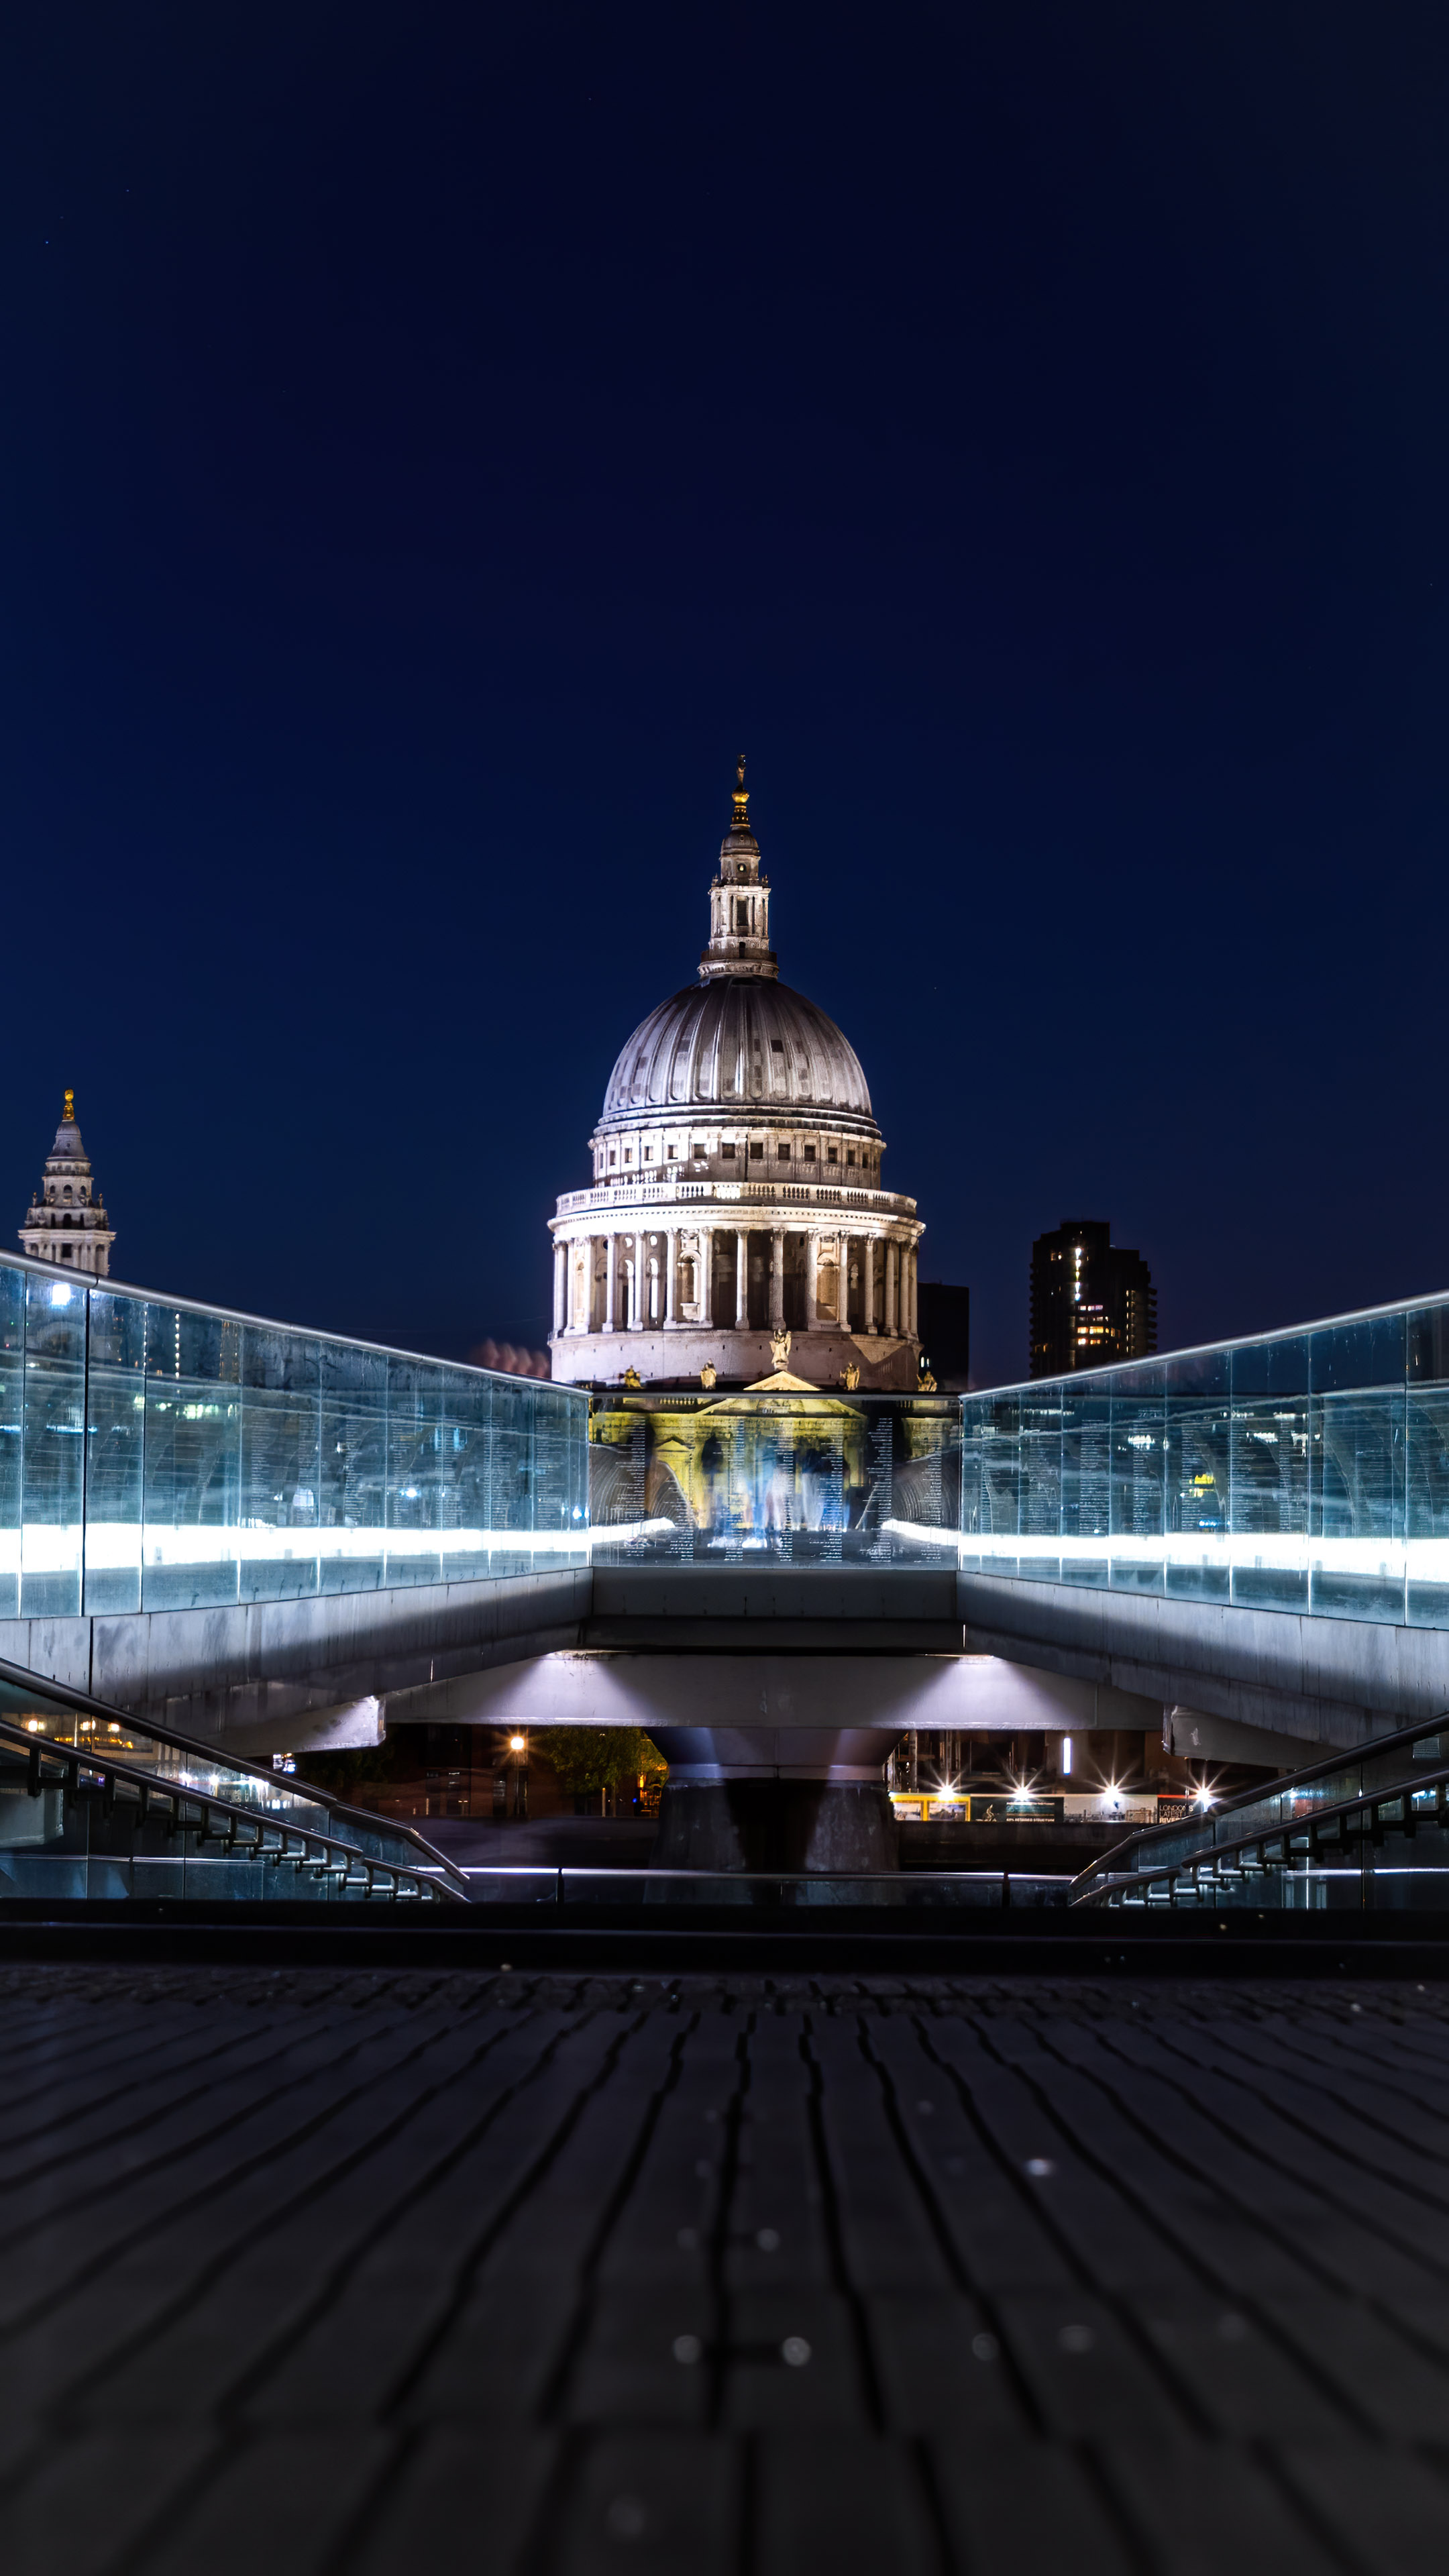 This mobile wallpaper features the vibrant and colorful night lights of London's St. Pauls Cathedral